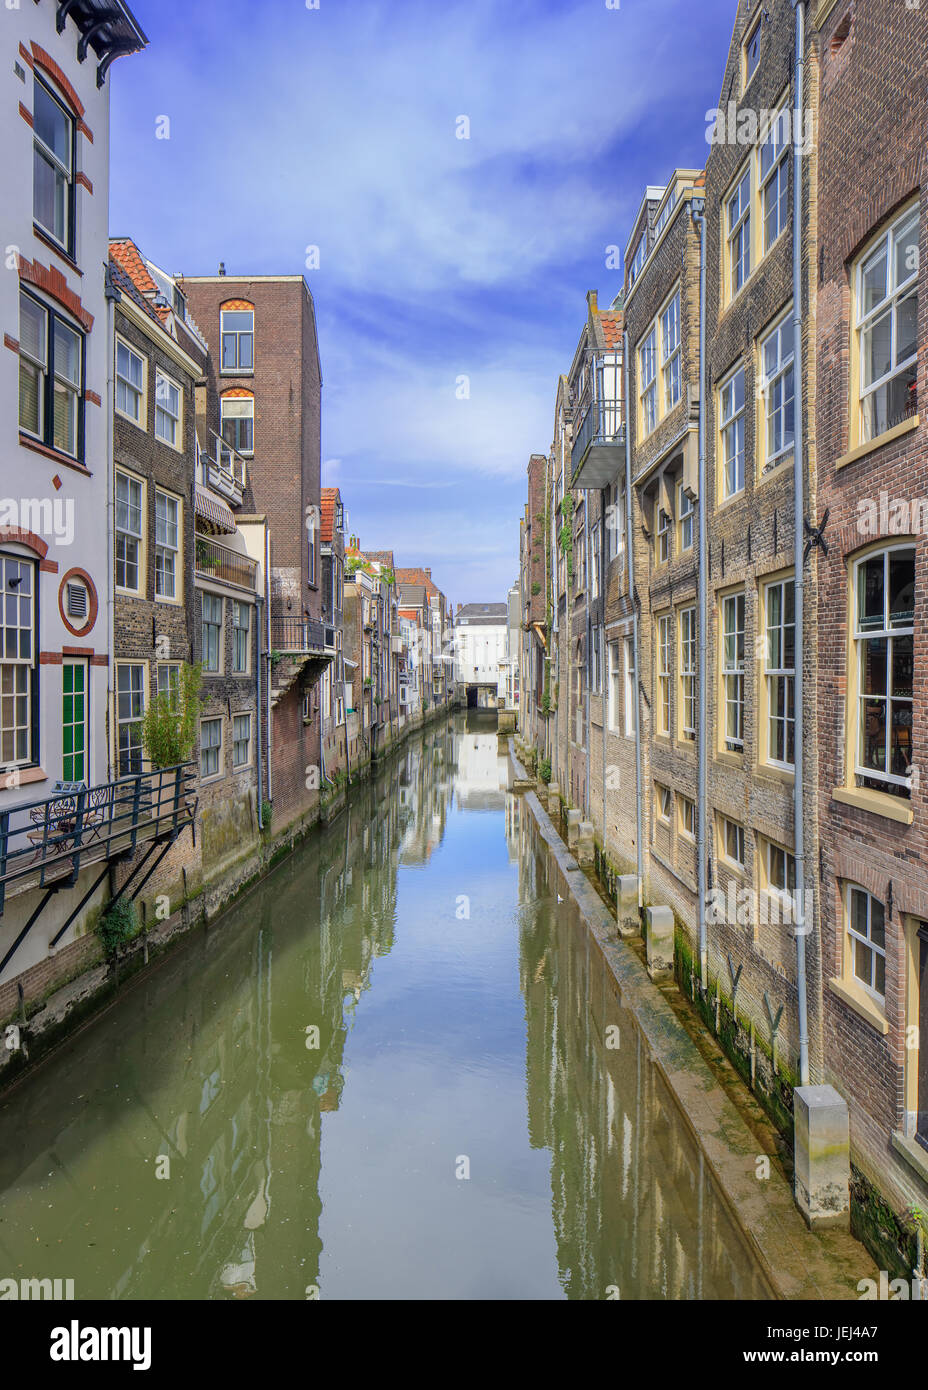 View on a green canal with ancient brick houses reflected, Dordrecht, Netherlands. Stock Photo